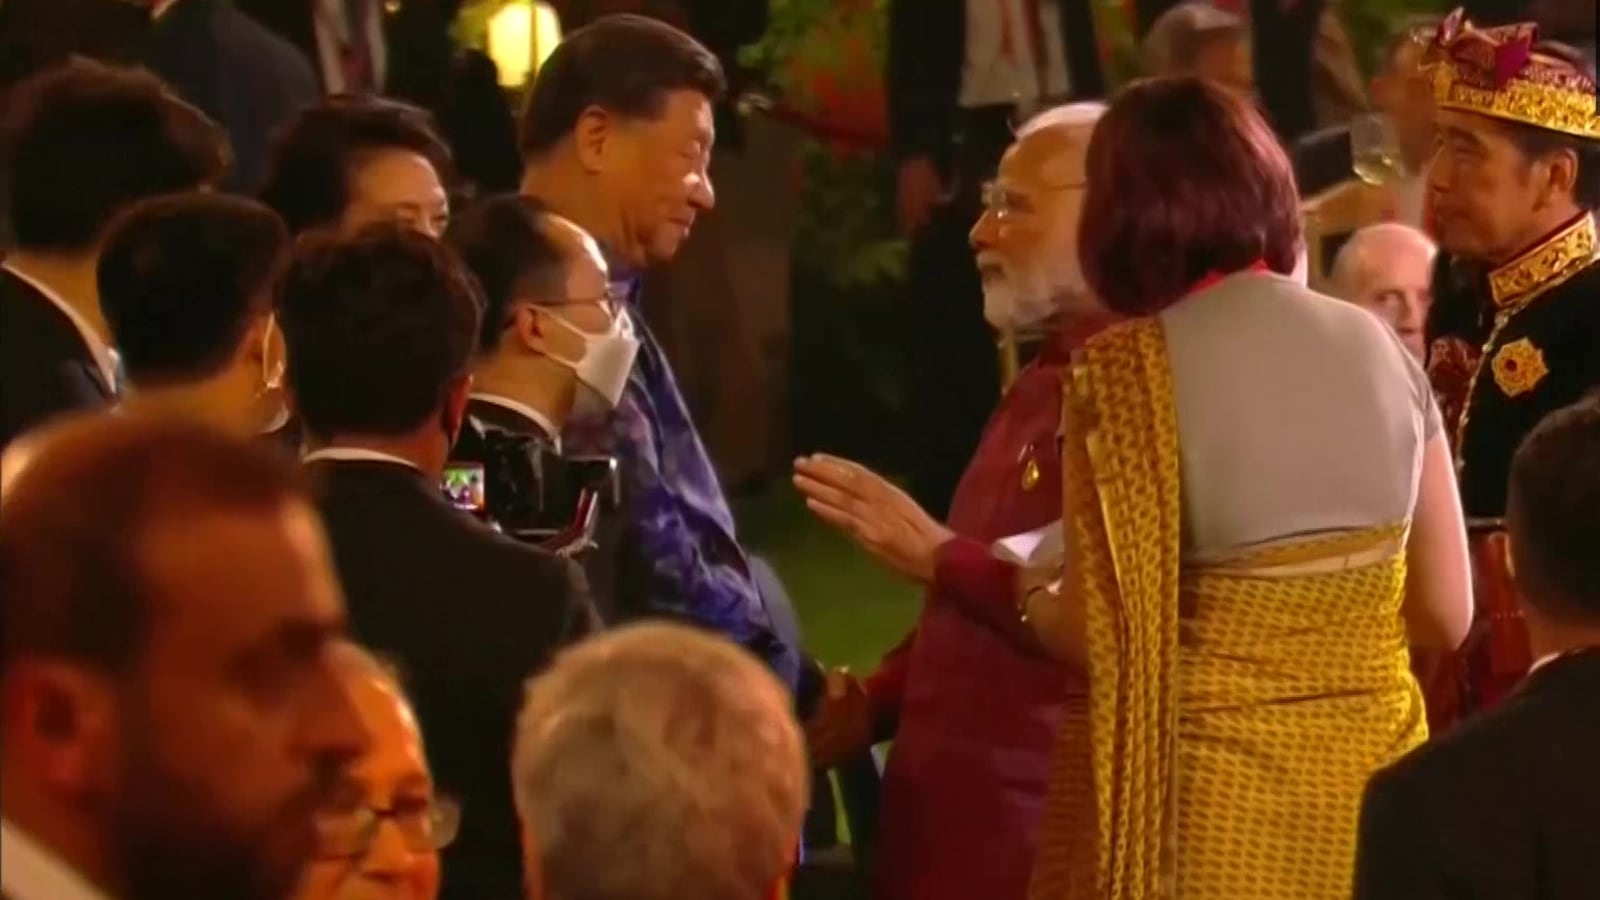 pm-modi-china-s-xi-jinping-exchange-greetings-at-g20-summit-dinner-in-indonesia